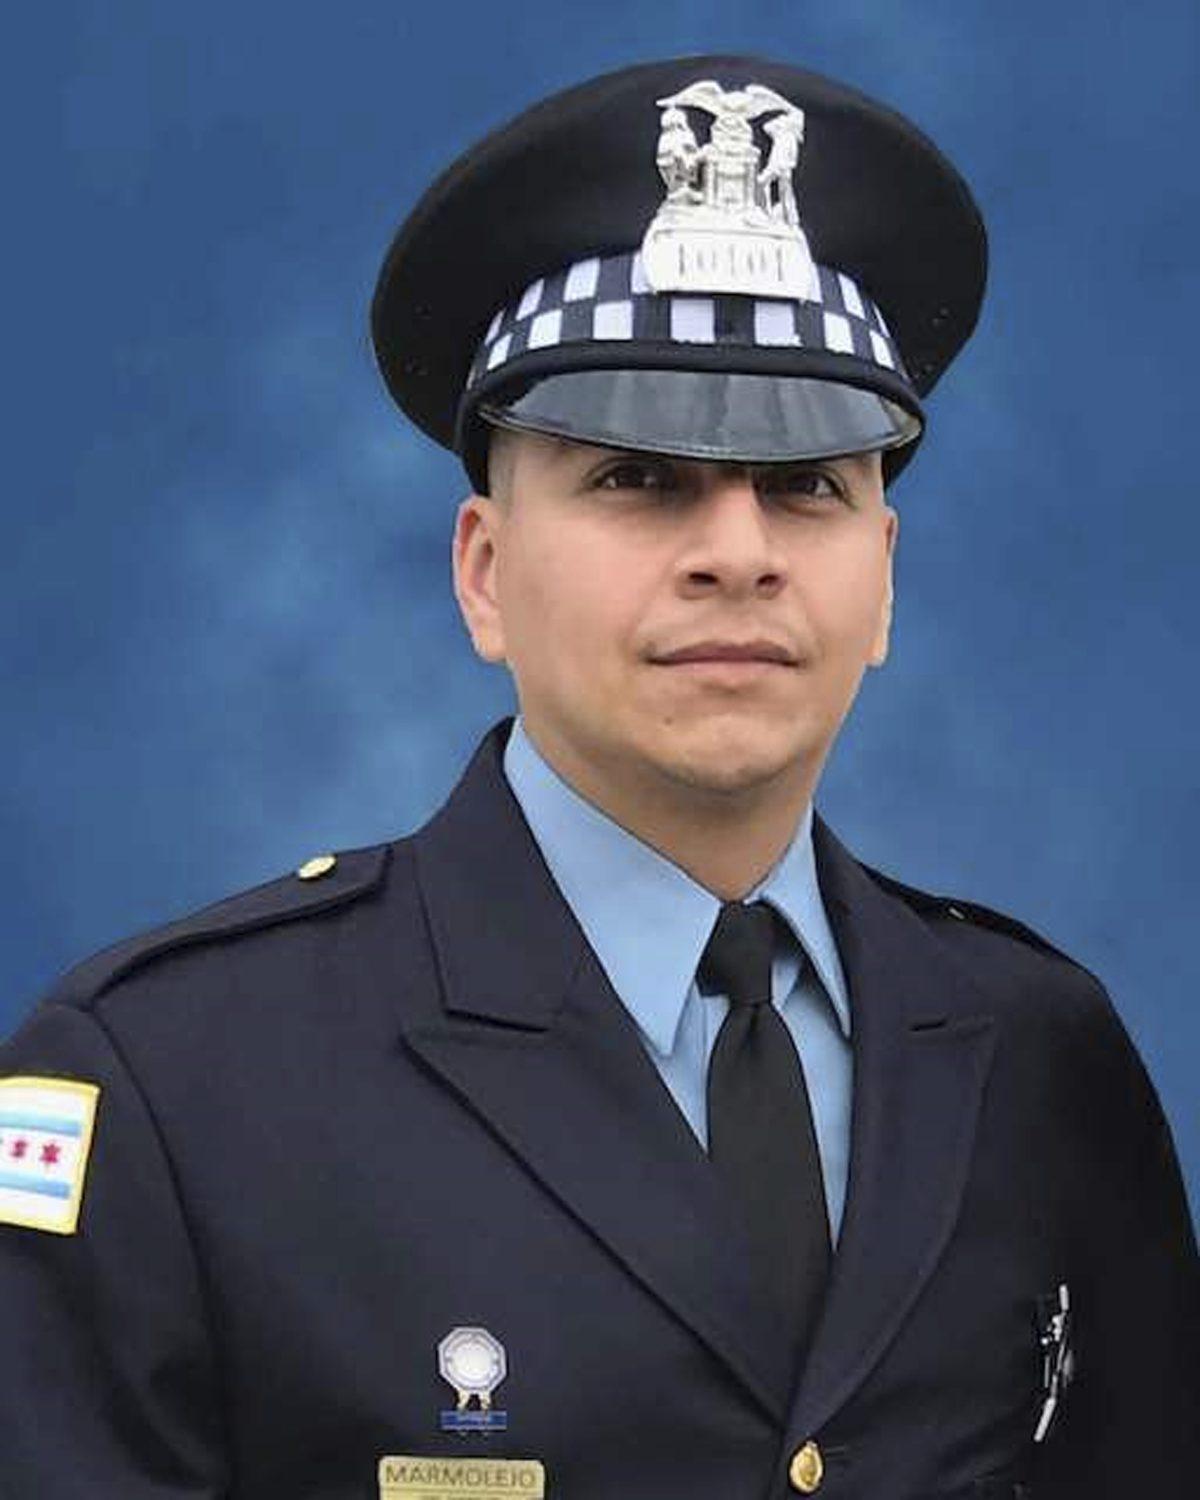 Chicago Police Officer Eduardo Marmolejo un an undated photo. Marmolejo and another officer Conrad Gary were fatally struck by a train as they investigated a report of gunshots on the city's far South Side on Dec. 17, 2018. (Chicago Police Department via AP)